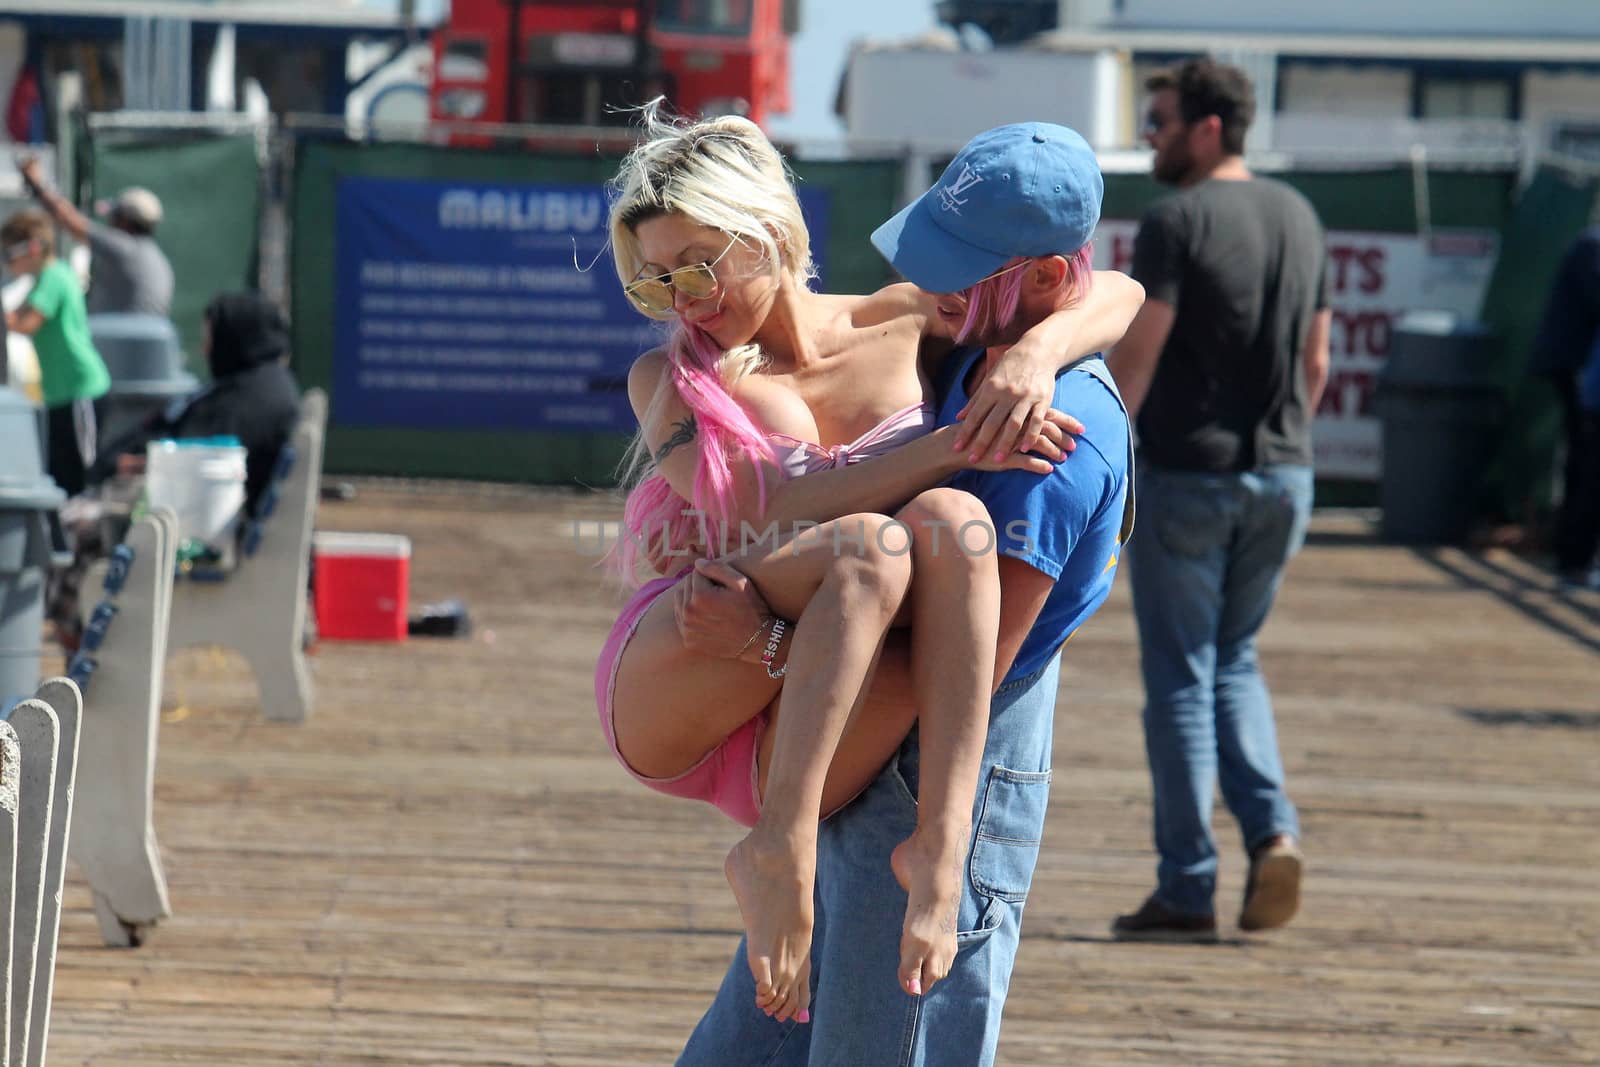 Frenchy Morgan, Jesse Willesee the "Celebrity Big Brother" Star and ex-lebian girlfriend of Gabi Grecko is spotted getting romantic with Australian Musician Jesse Willesee at the Malibu Pier, Malibu, CA 05-15-17/ImageCollect by ImageCollect